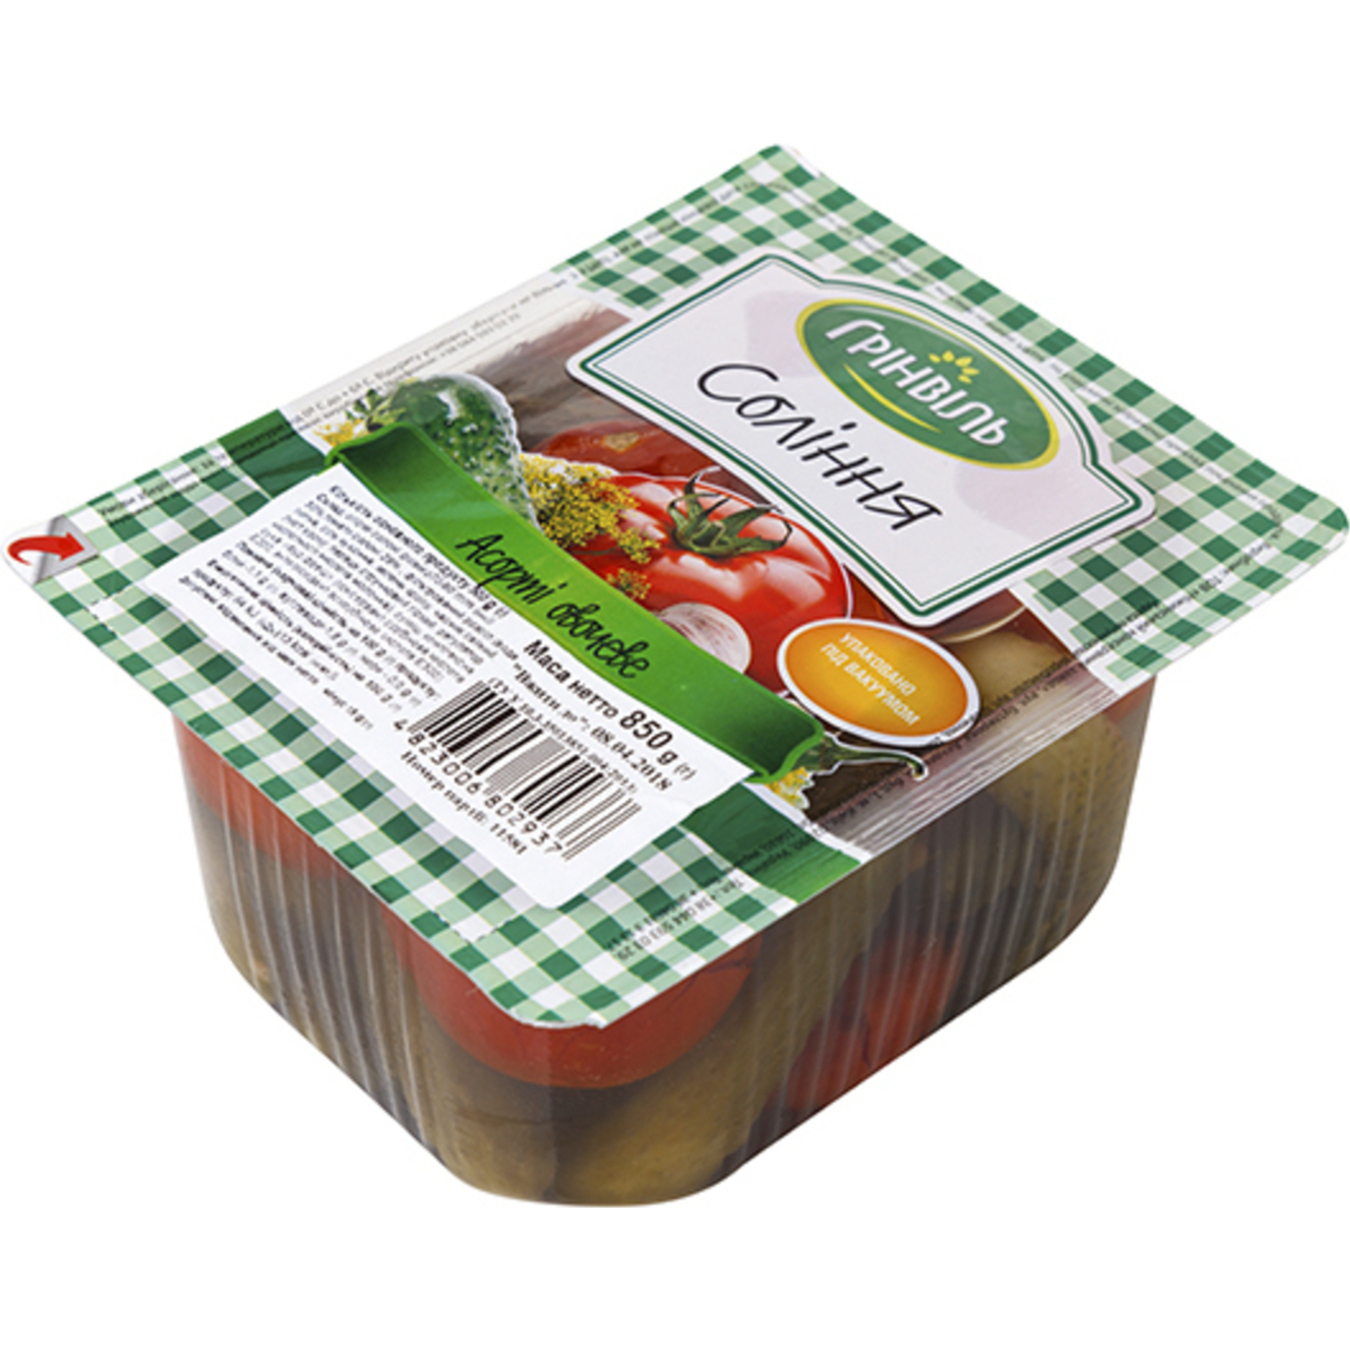 Assorted Greenville vegetable tomatoes and cucumbers 500g